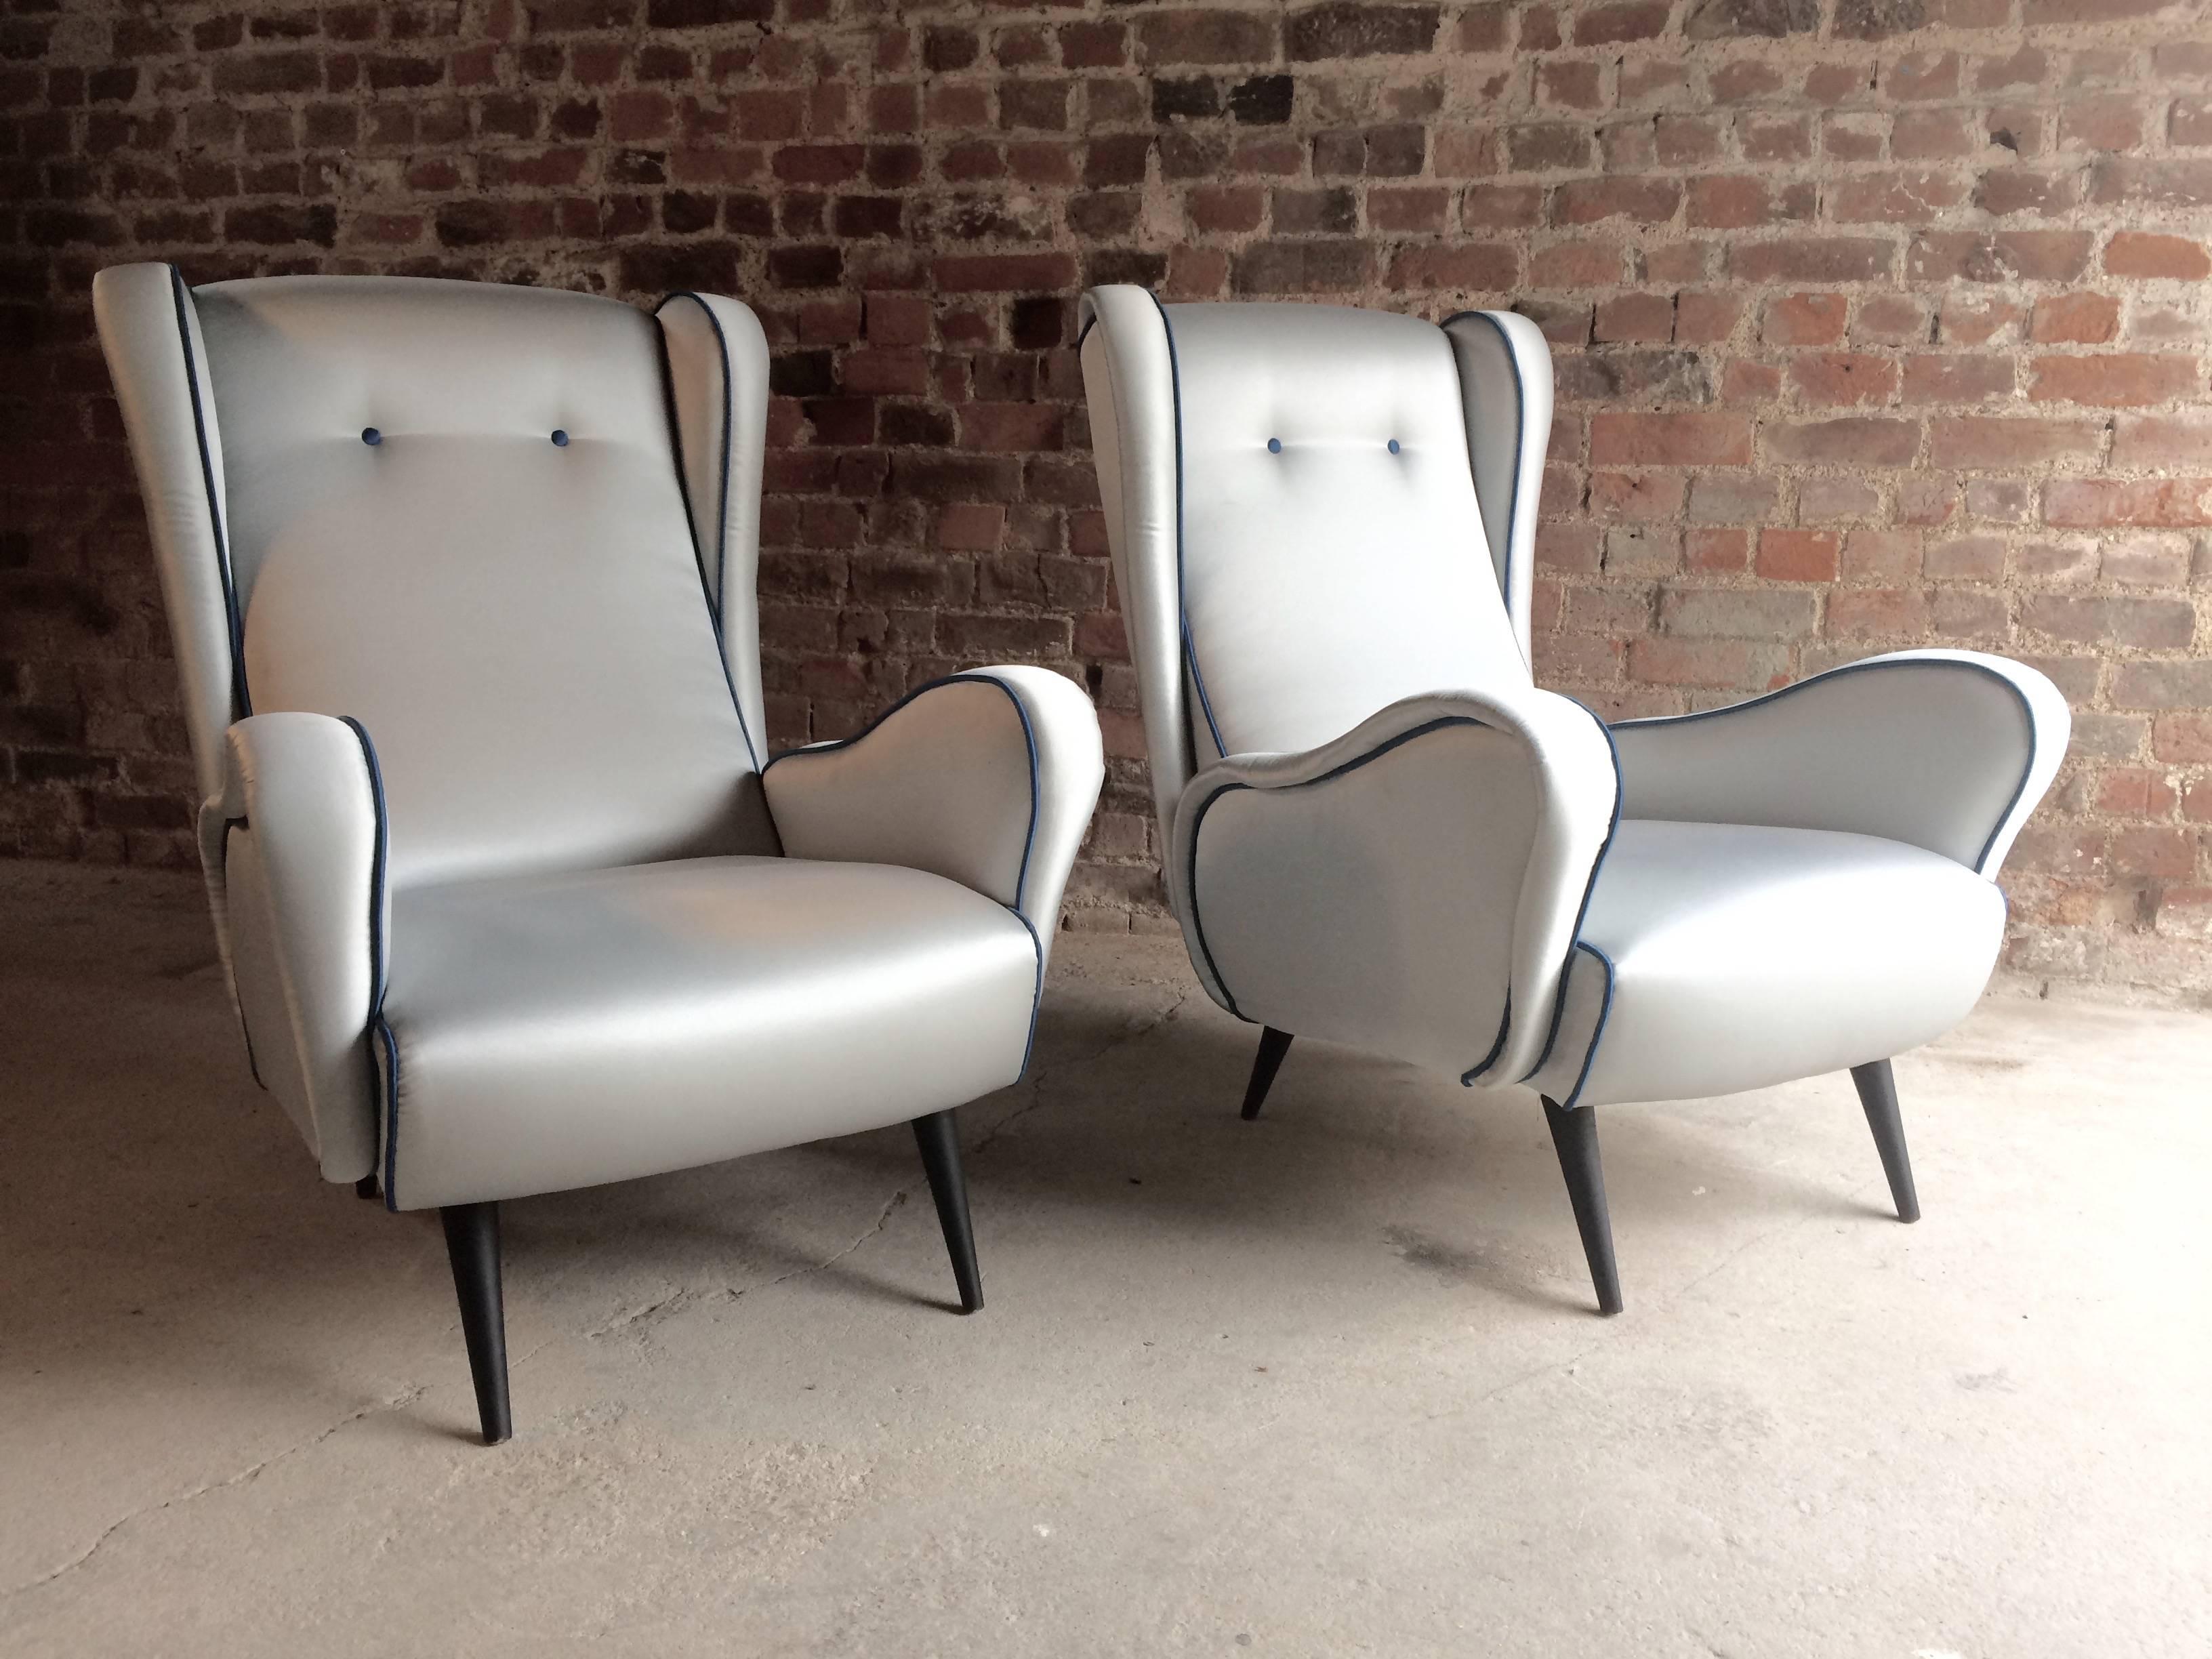 Stunning Mid-Century Italian design armchairs, 1950s

A fabulous original vintage pair of 1950s Italian armchairs, in blue, with electric blue piping, on black ebonised tapering wood legs, wonderful 1950s iconic design lines, looks amazing

Please